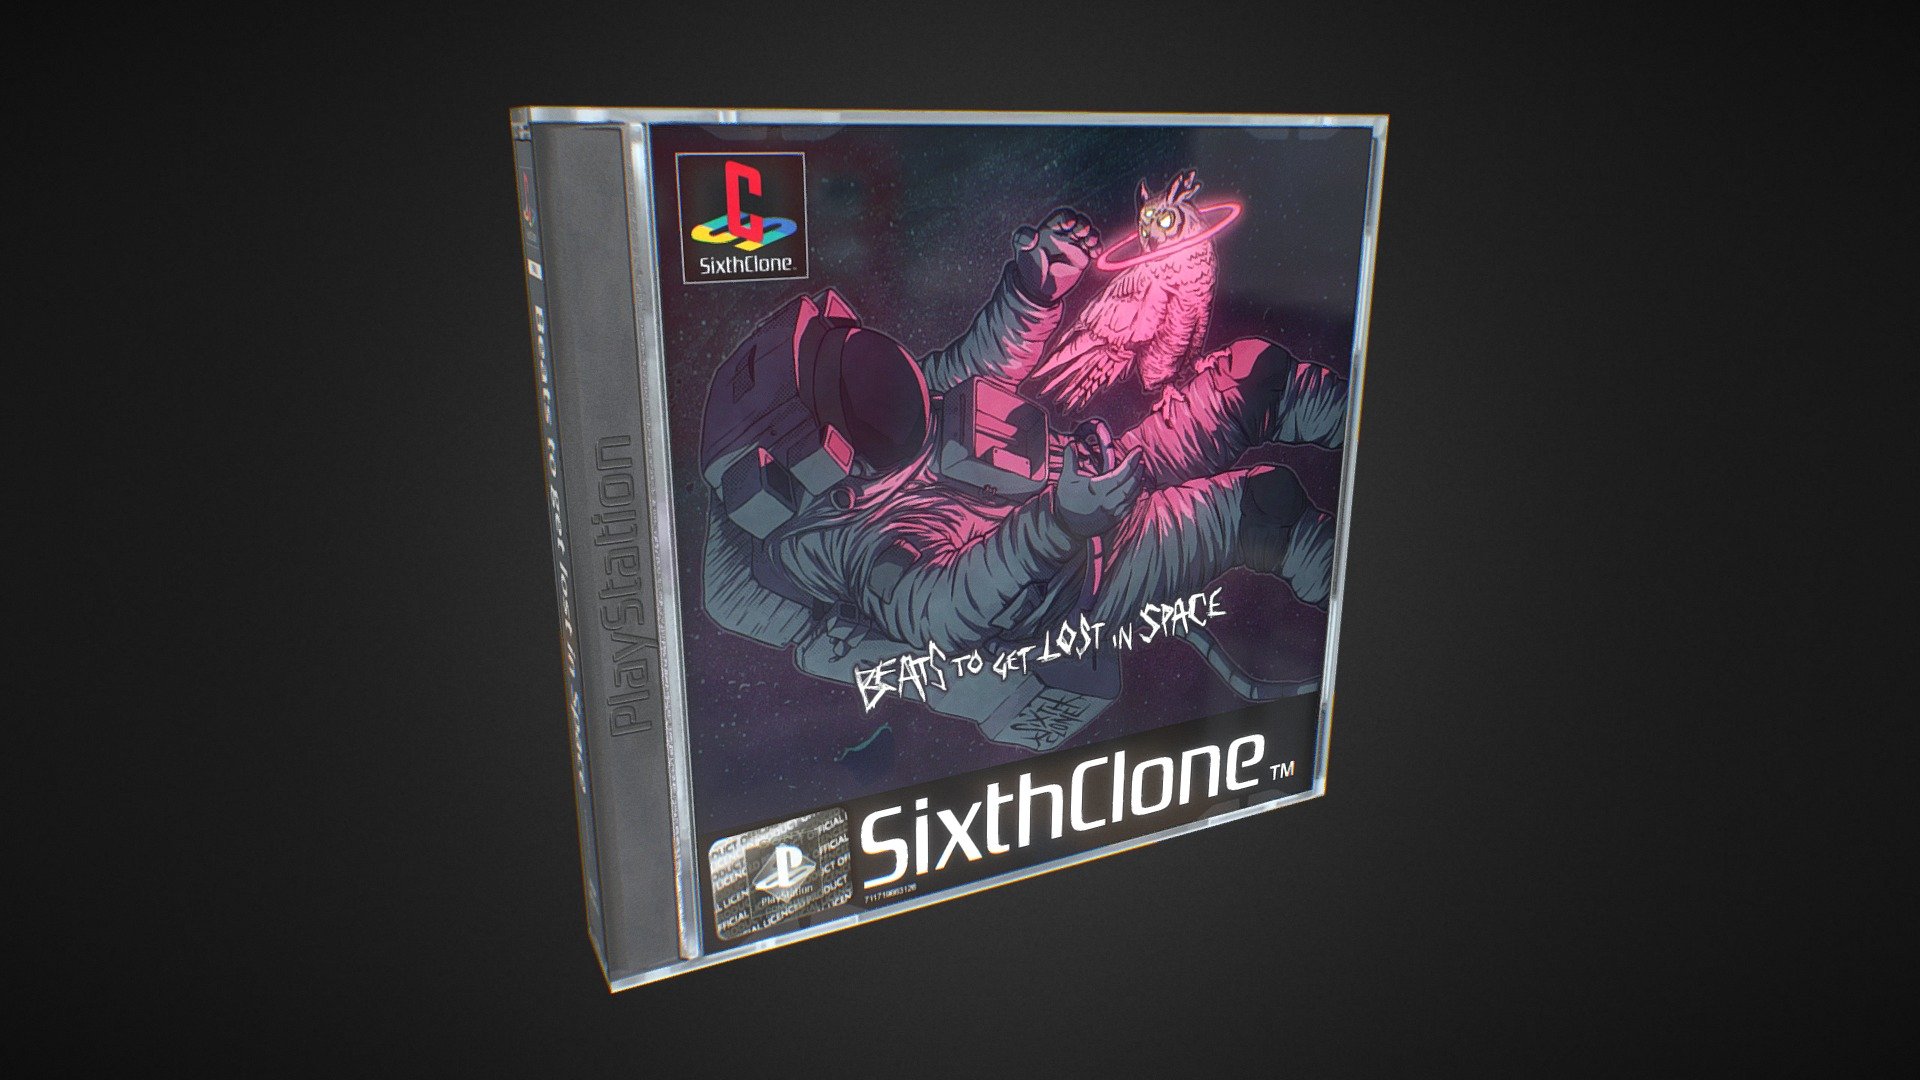 https://www.youtube.com/watch?v=BgQXB-K-JE8 - PS1 GAME CASE - 3D model by Sixthclone 3d model